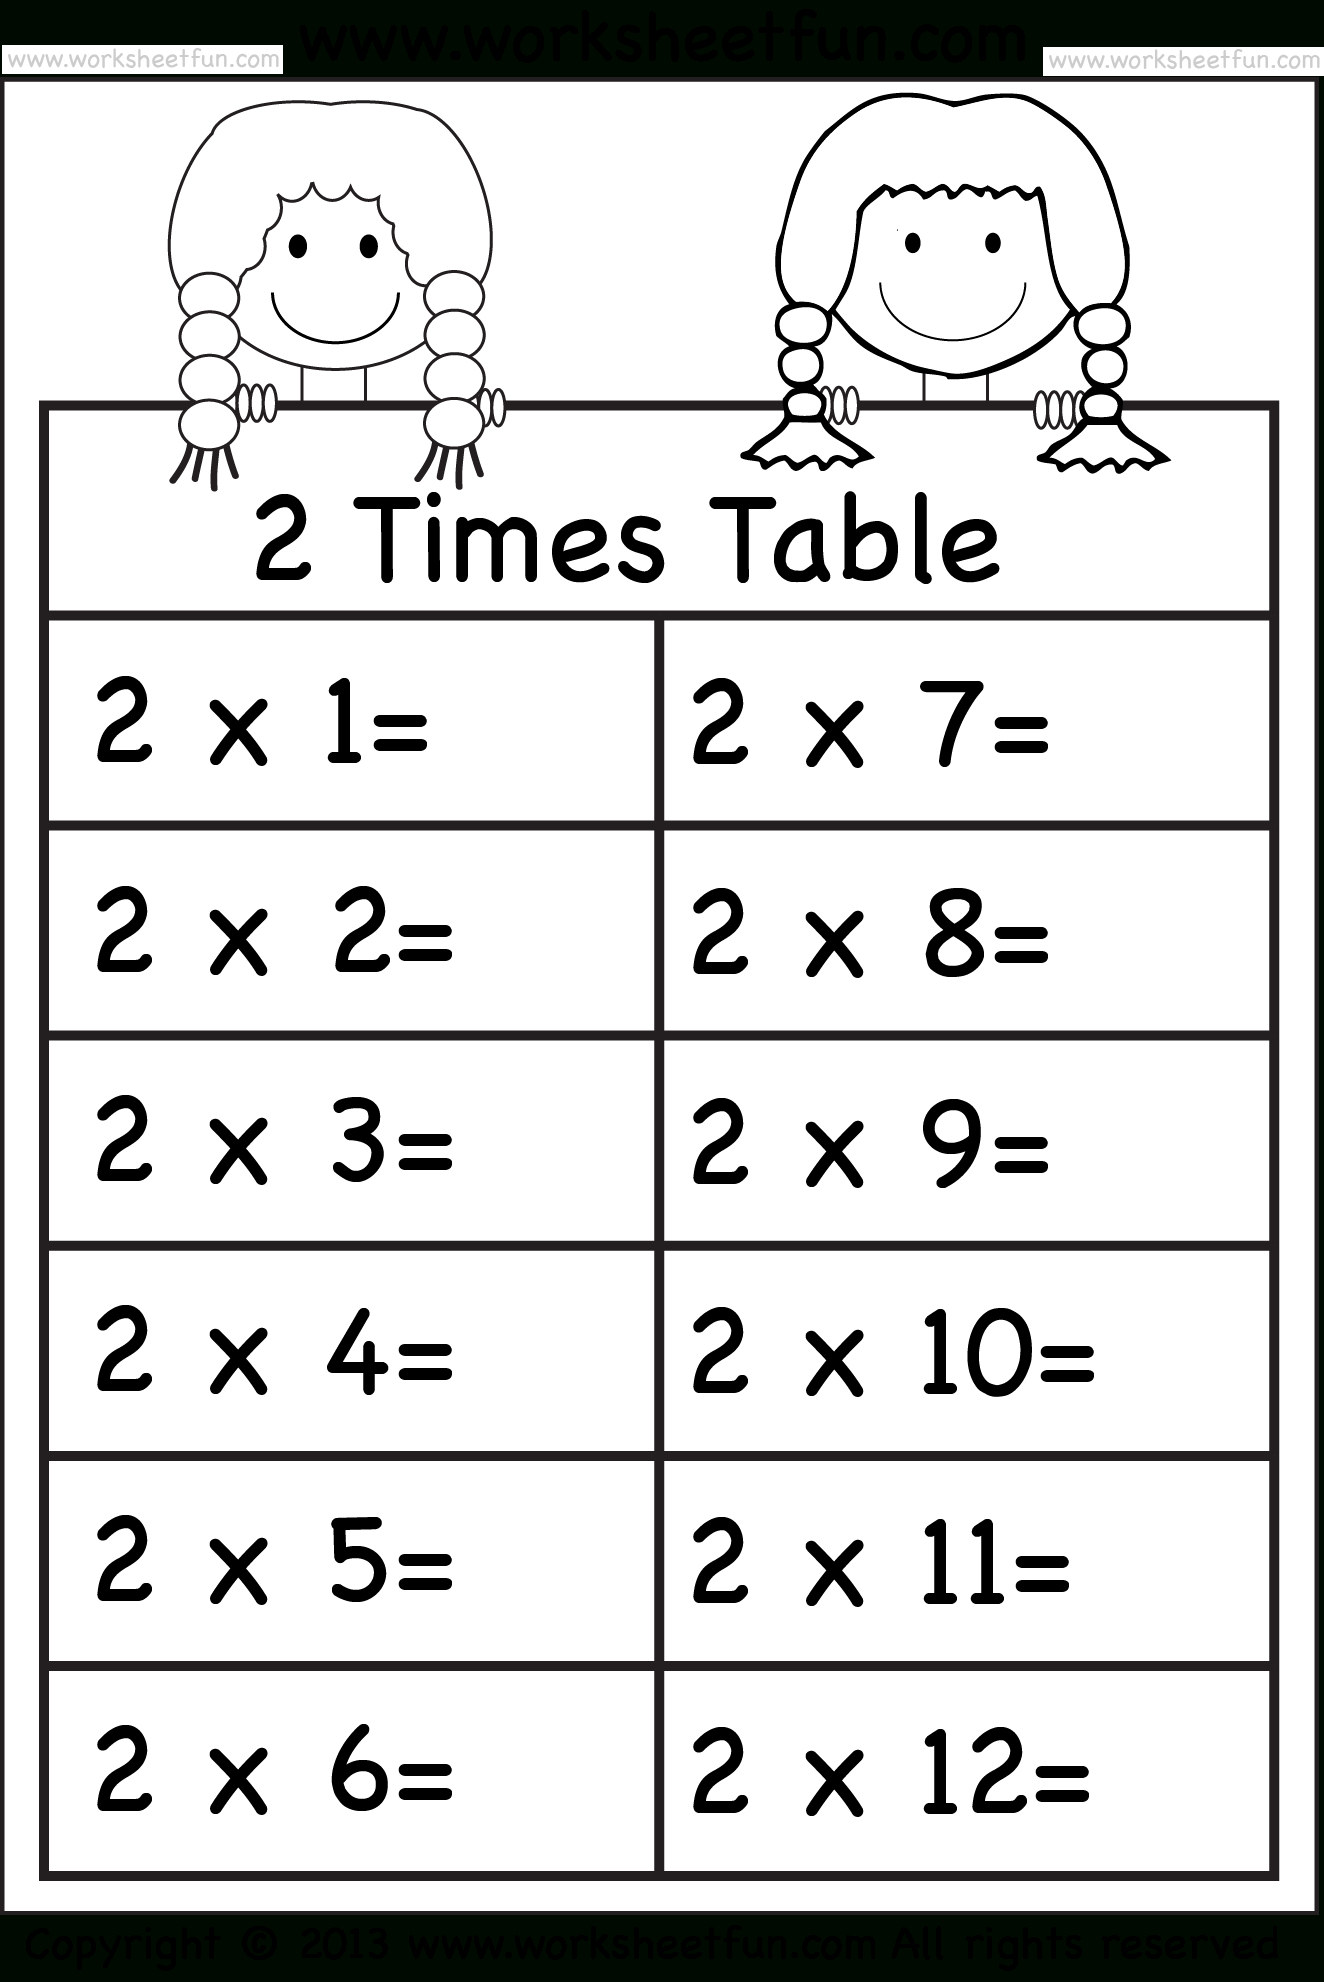 Times Tables Worksheets – 2, 3, 4, 5, 6, 7, 8, 9, 10, 11 And with Printable Multiplication Table Of 3